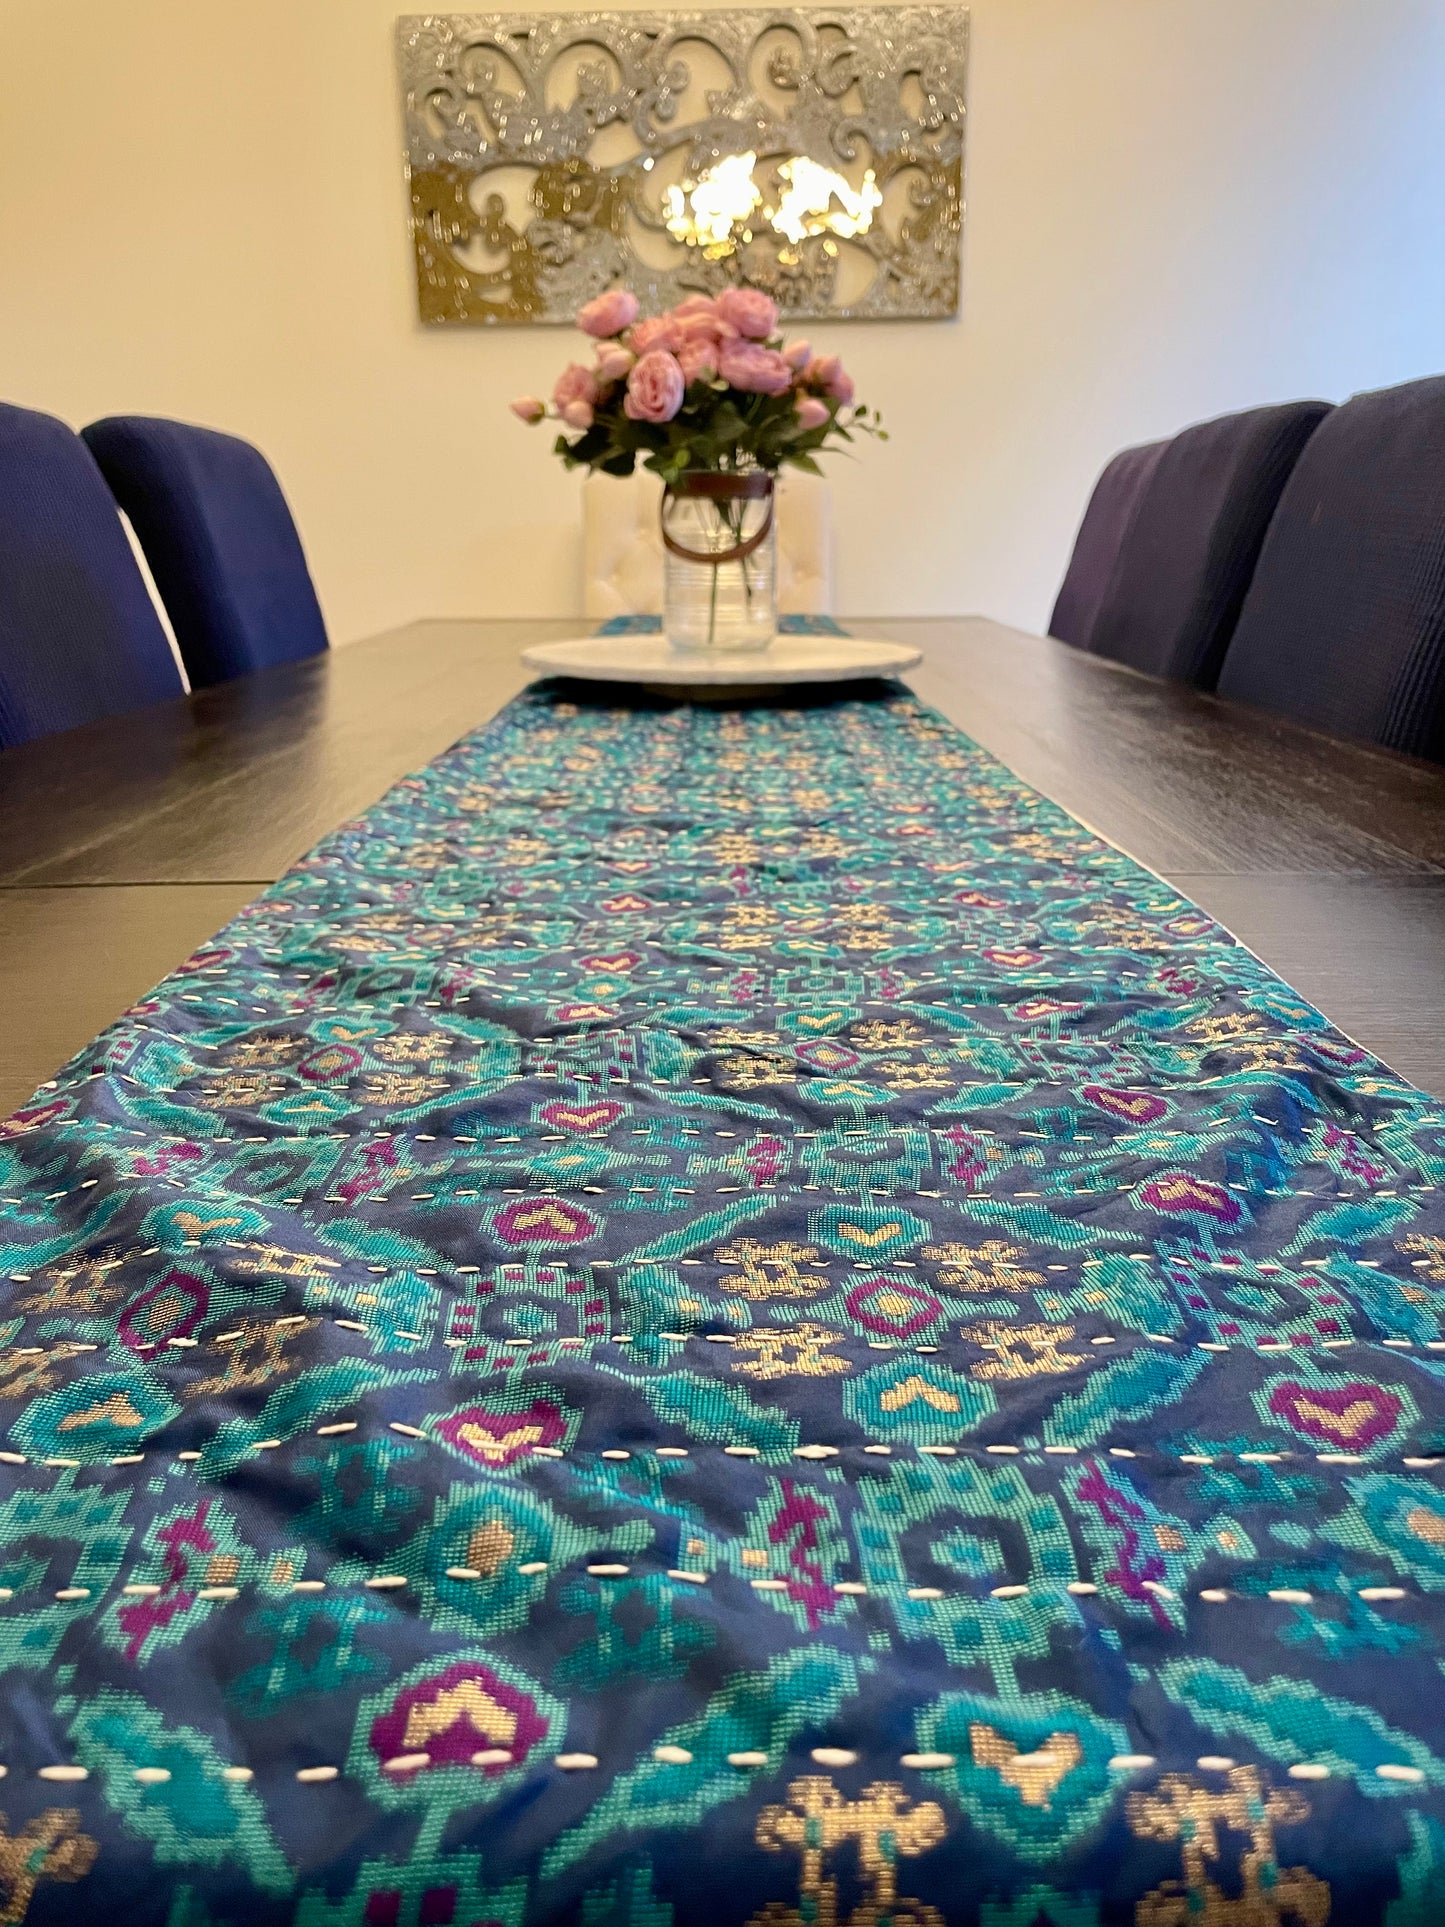 The Ikat Collection Kantha Hand-Stitched Table Runner